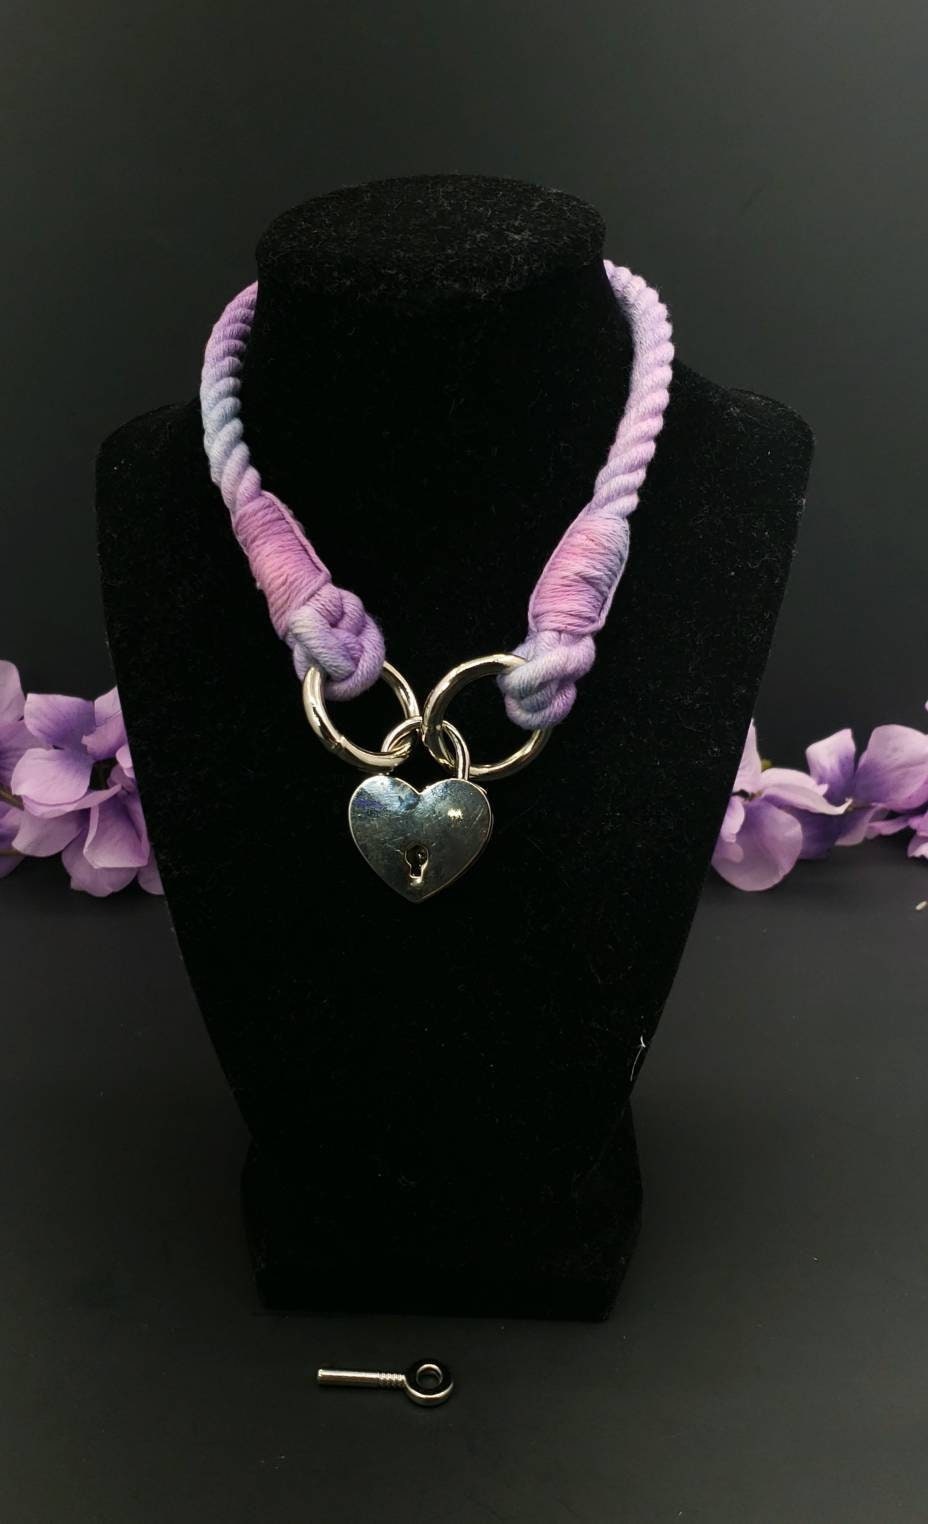 Iridescent Heart Locking Collar - BDSM Rope Choker - Submissive Cotton Collar | Novelty Choker Accessory for Roleplay